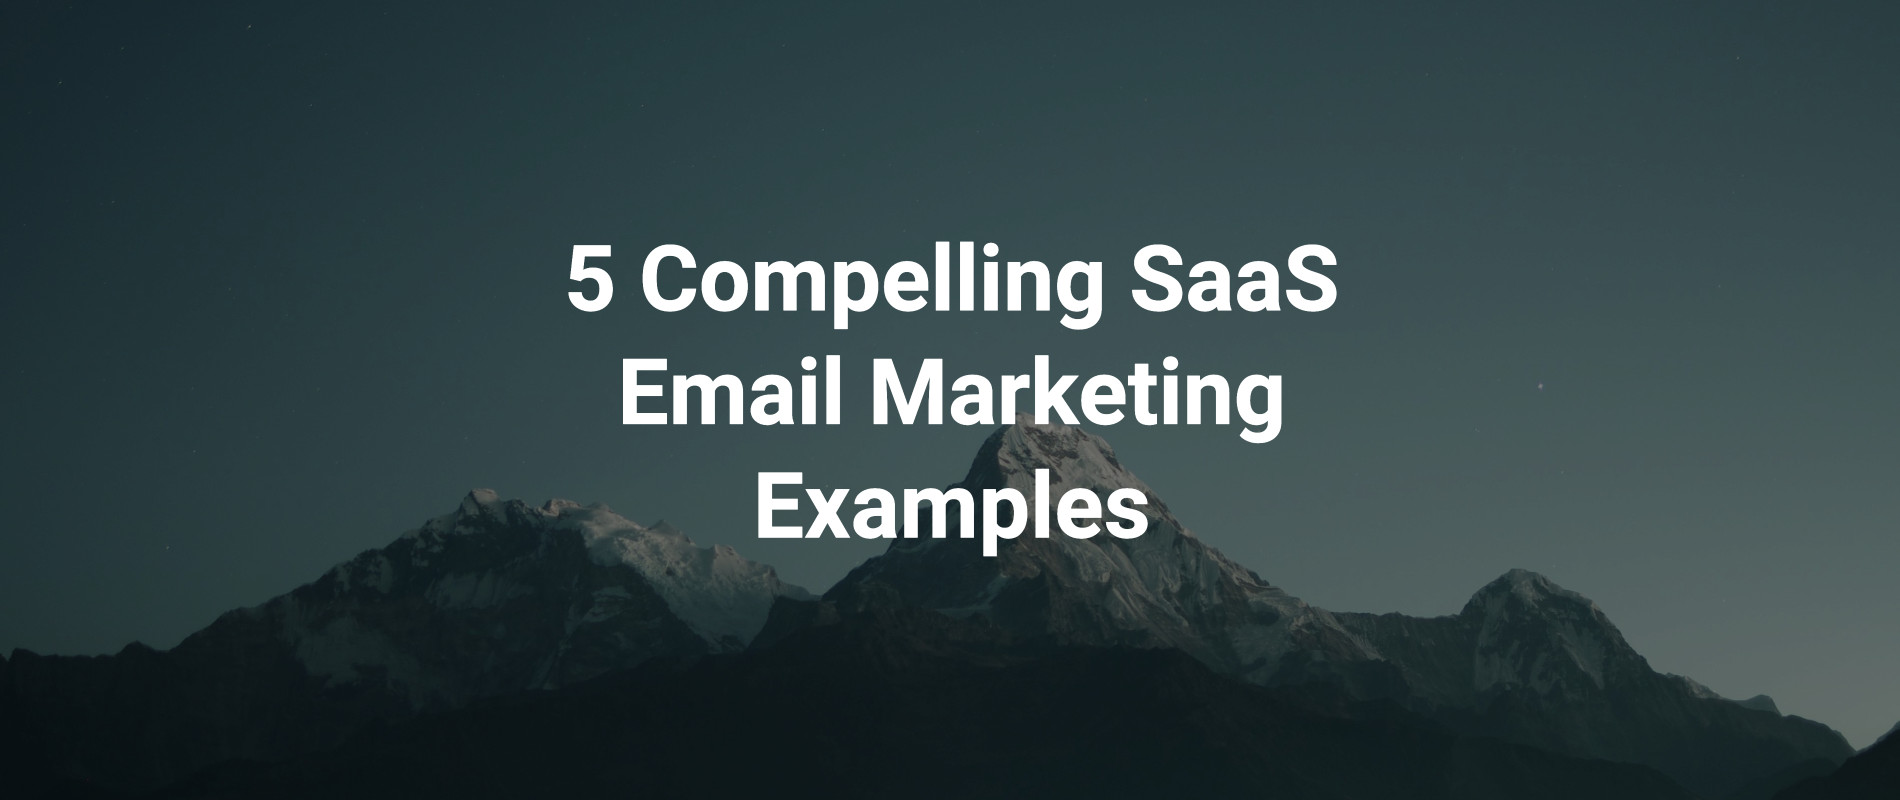 5 Compelling SaaS Email Marketing Examples